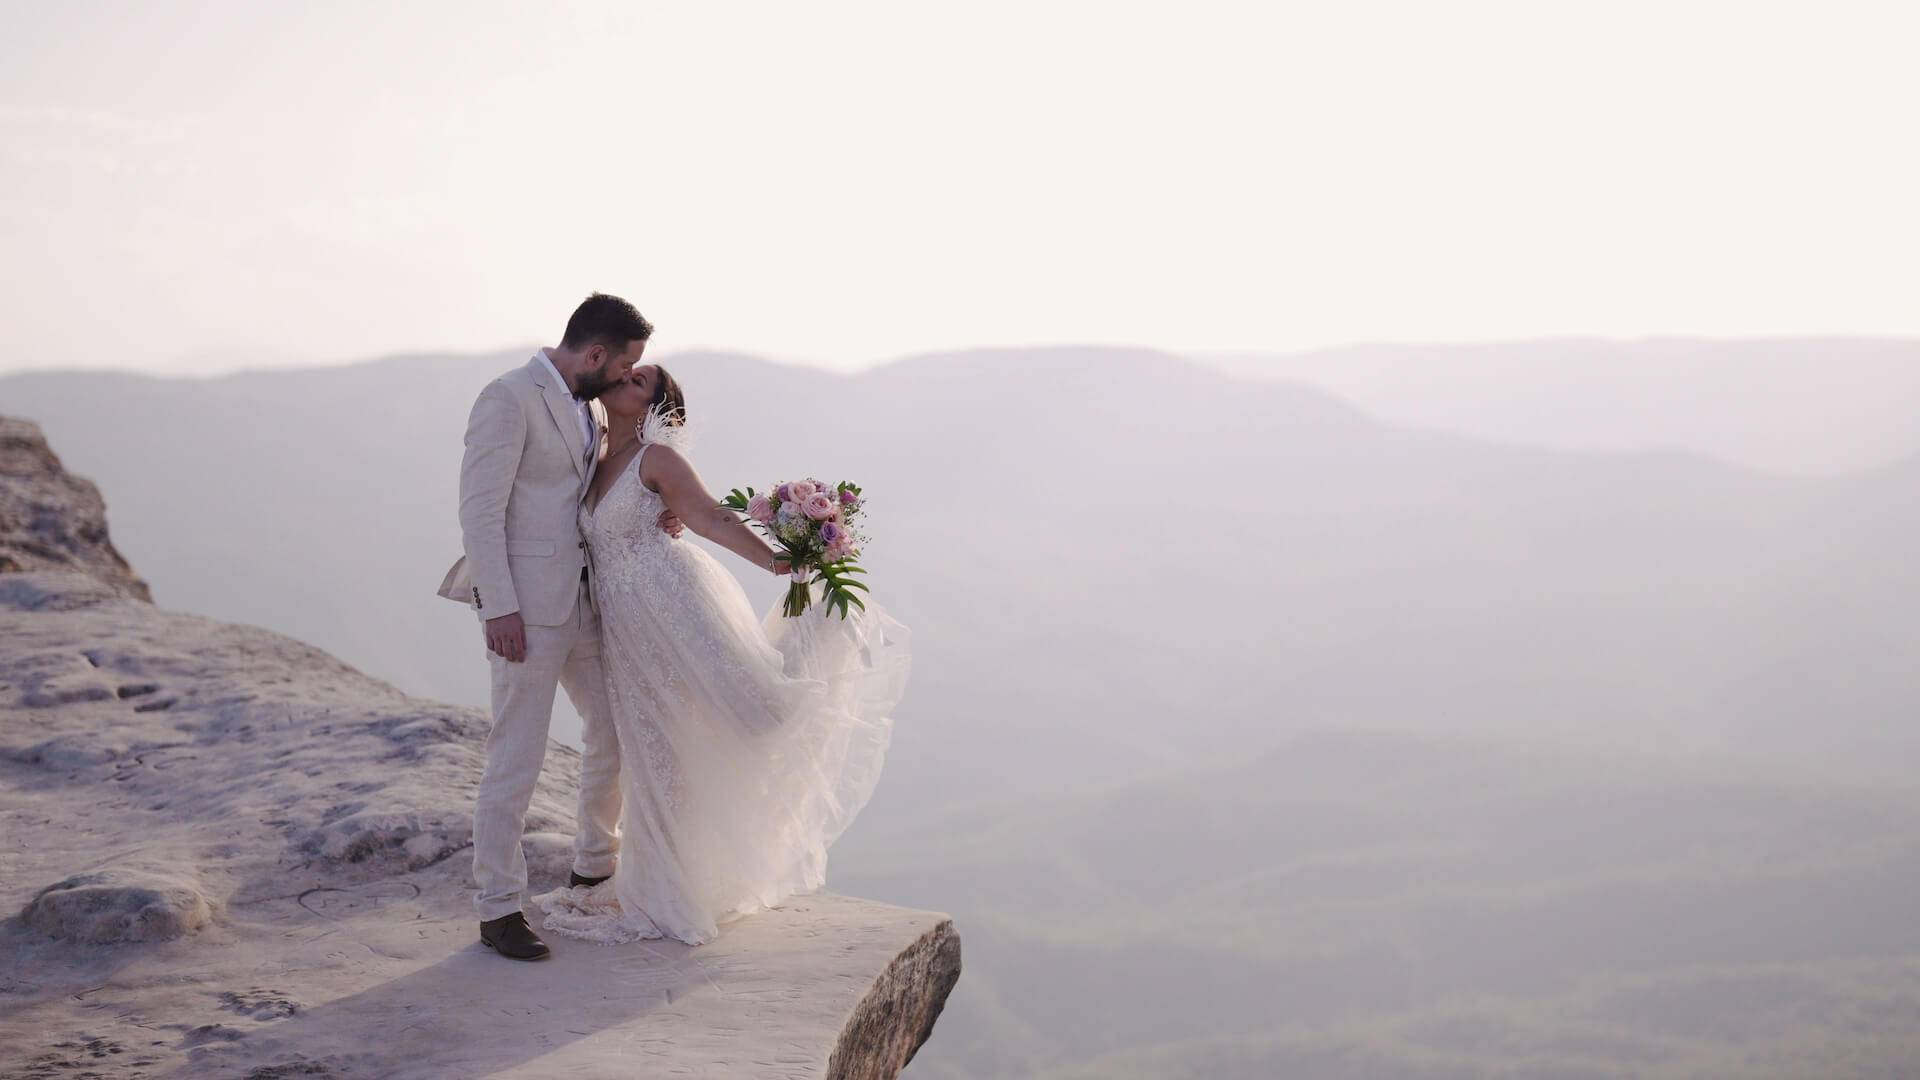 Newly married standing on a cliff with views of a valley - wedding videography services in the Blue Mountains and Greater NSW - Lovereel